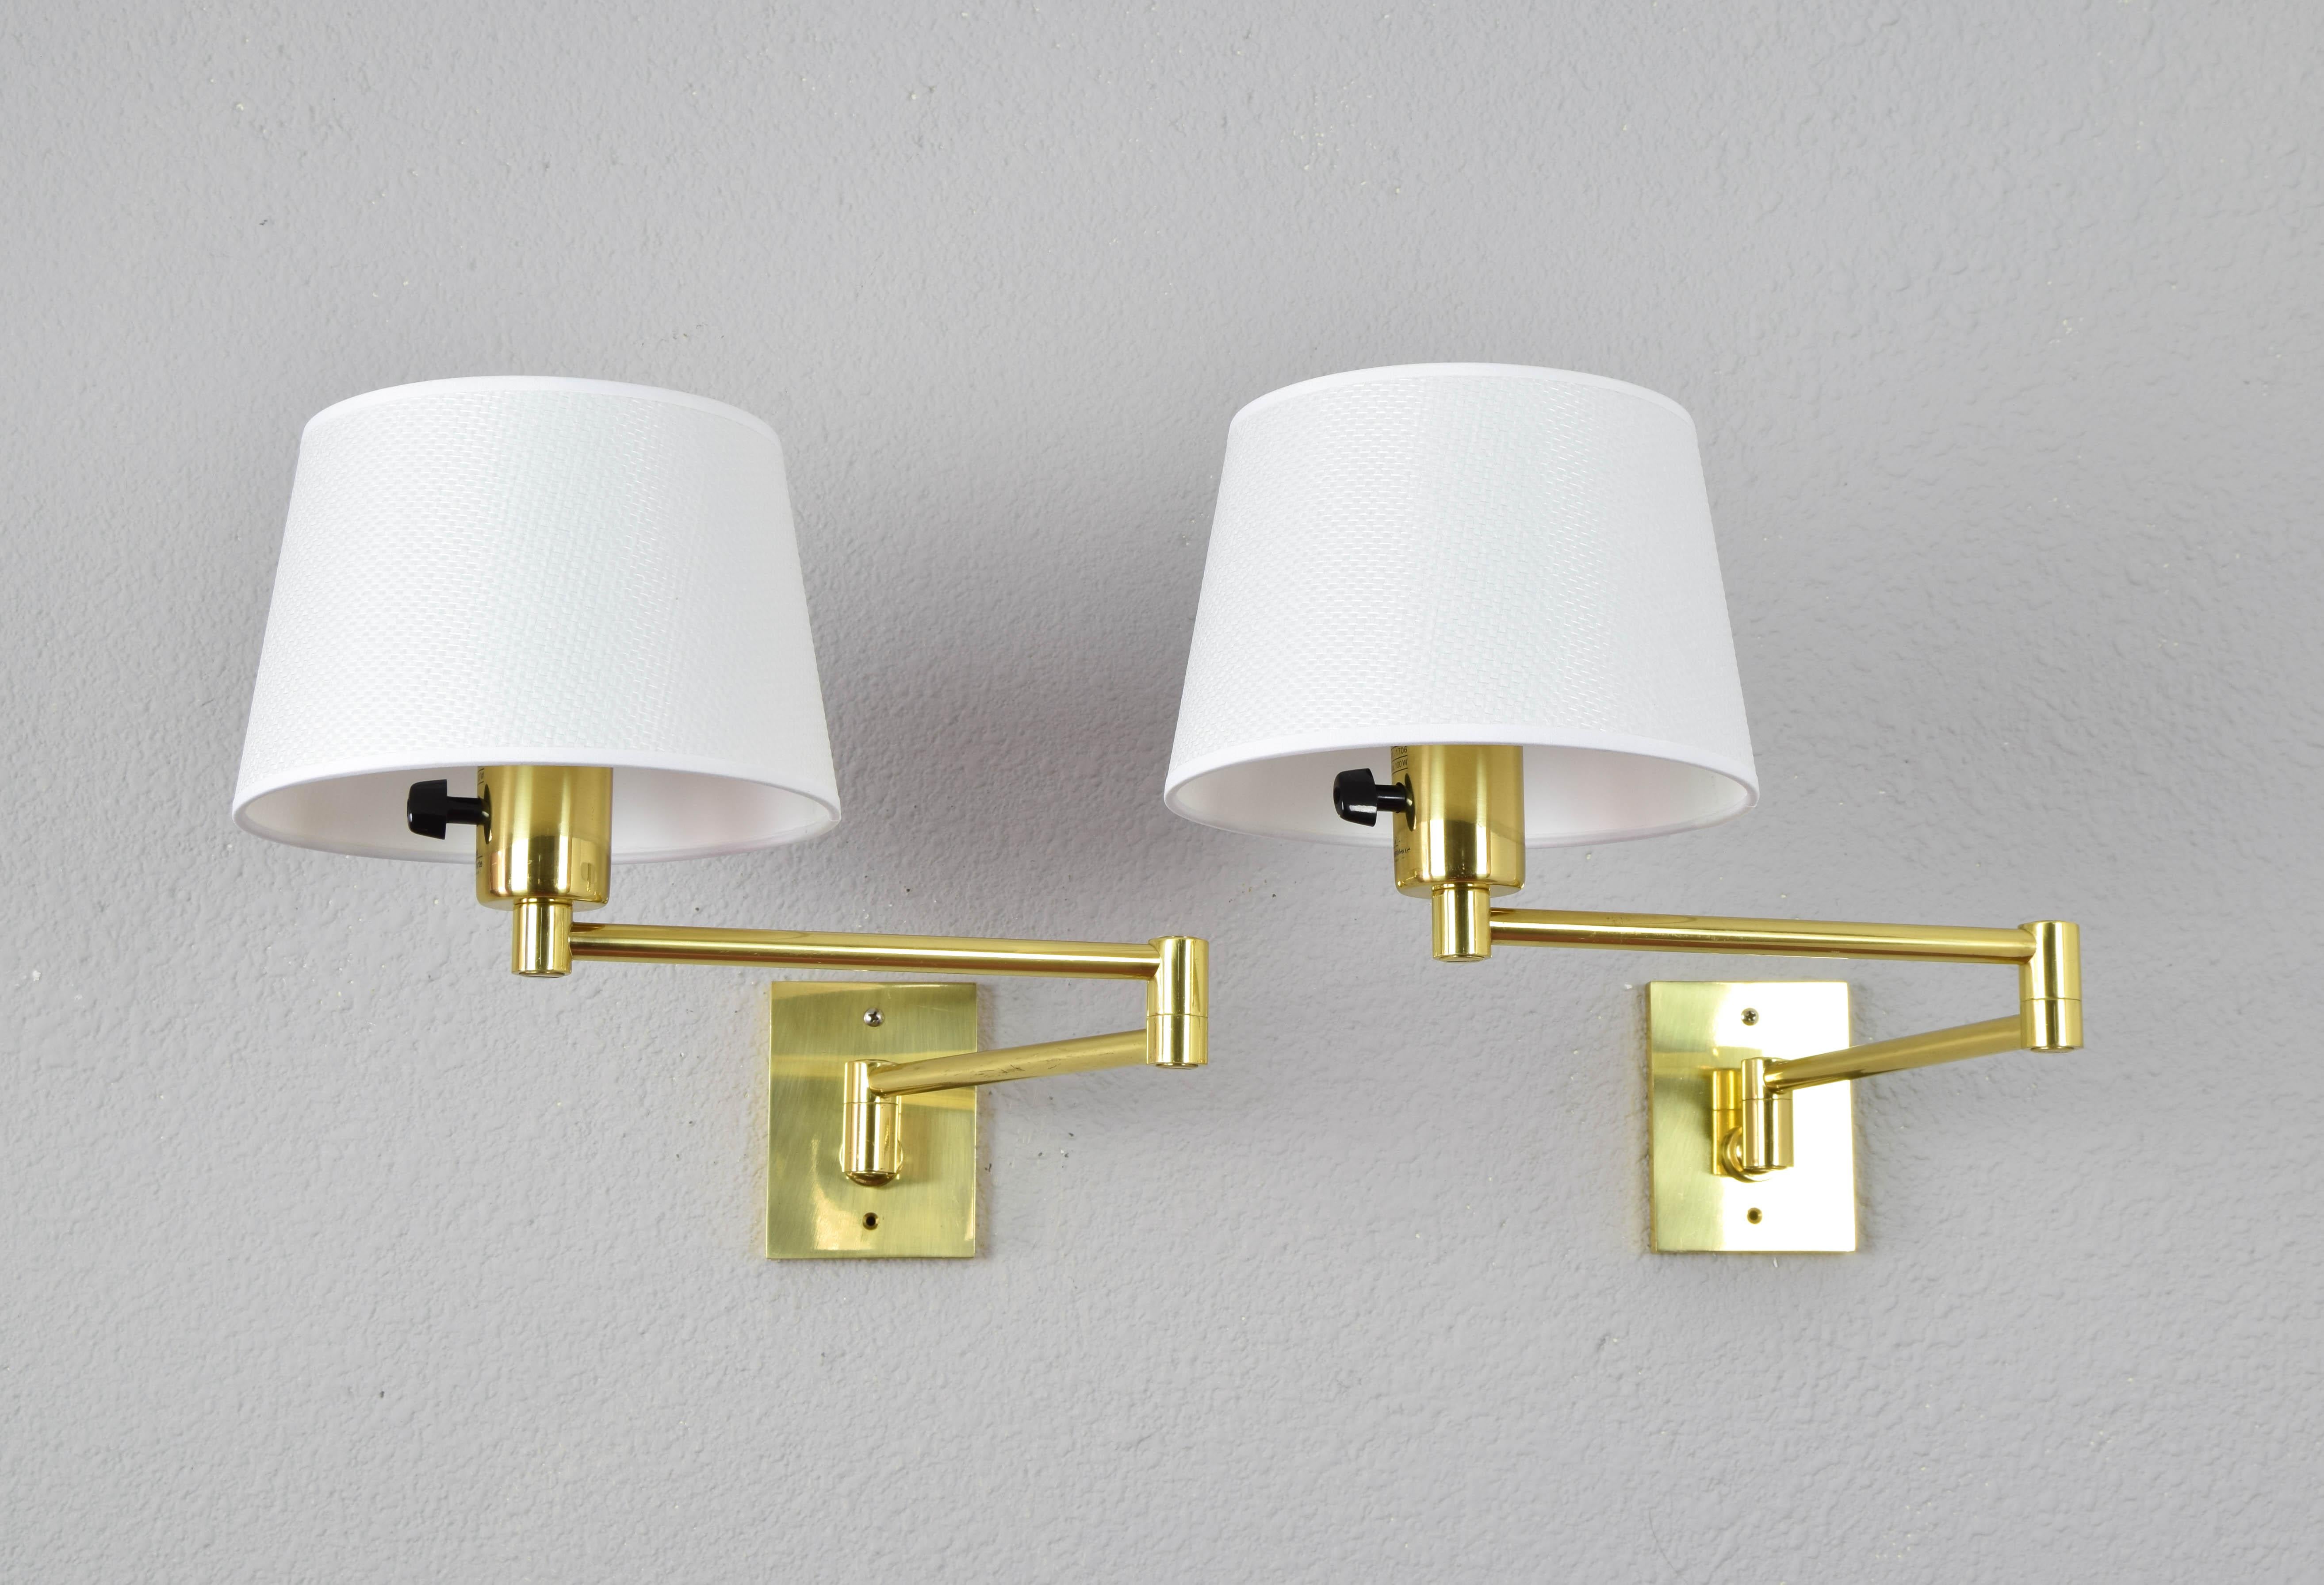 Pair of wall lamps designed by George W. Hansen in the 1960s and produced by the Spanish firm Metalarte with permission from Hansen Lamps New York in the 1970s. Brass structure and articulated arm.
Structures in proper operation. Brass in very good